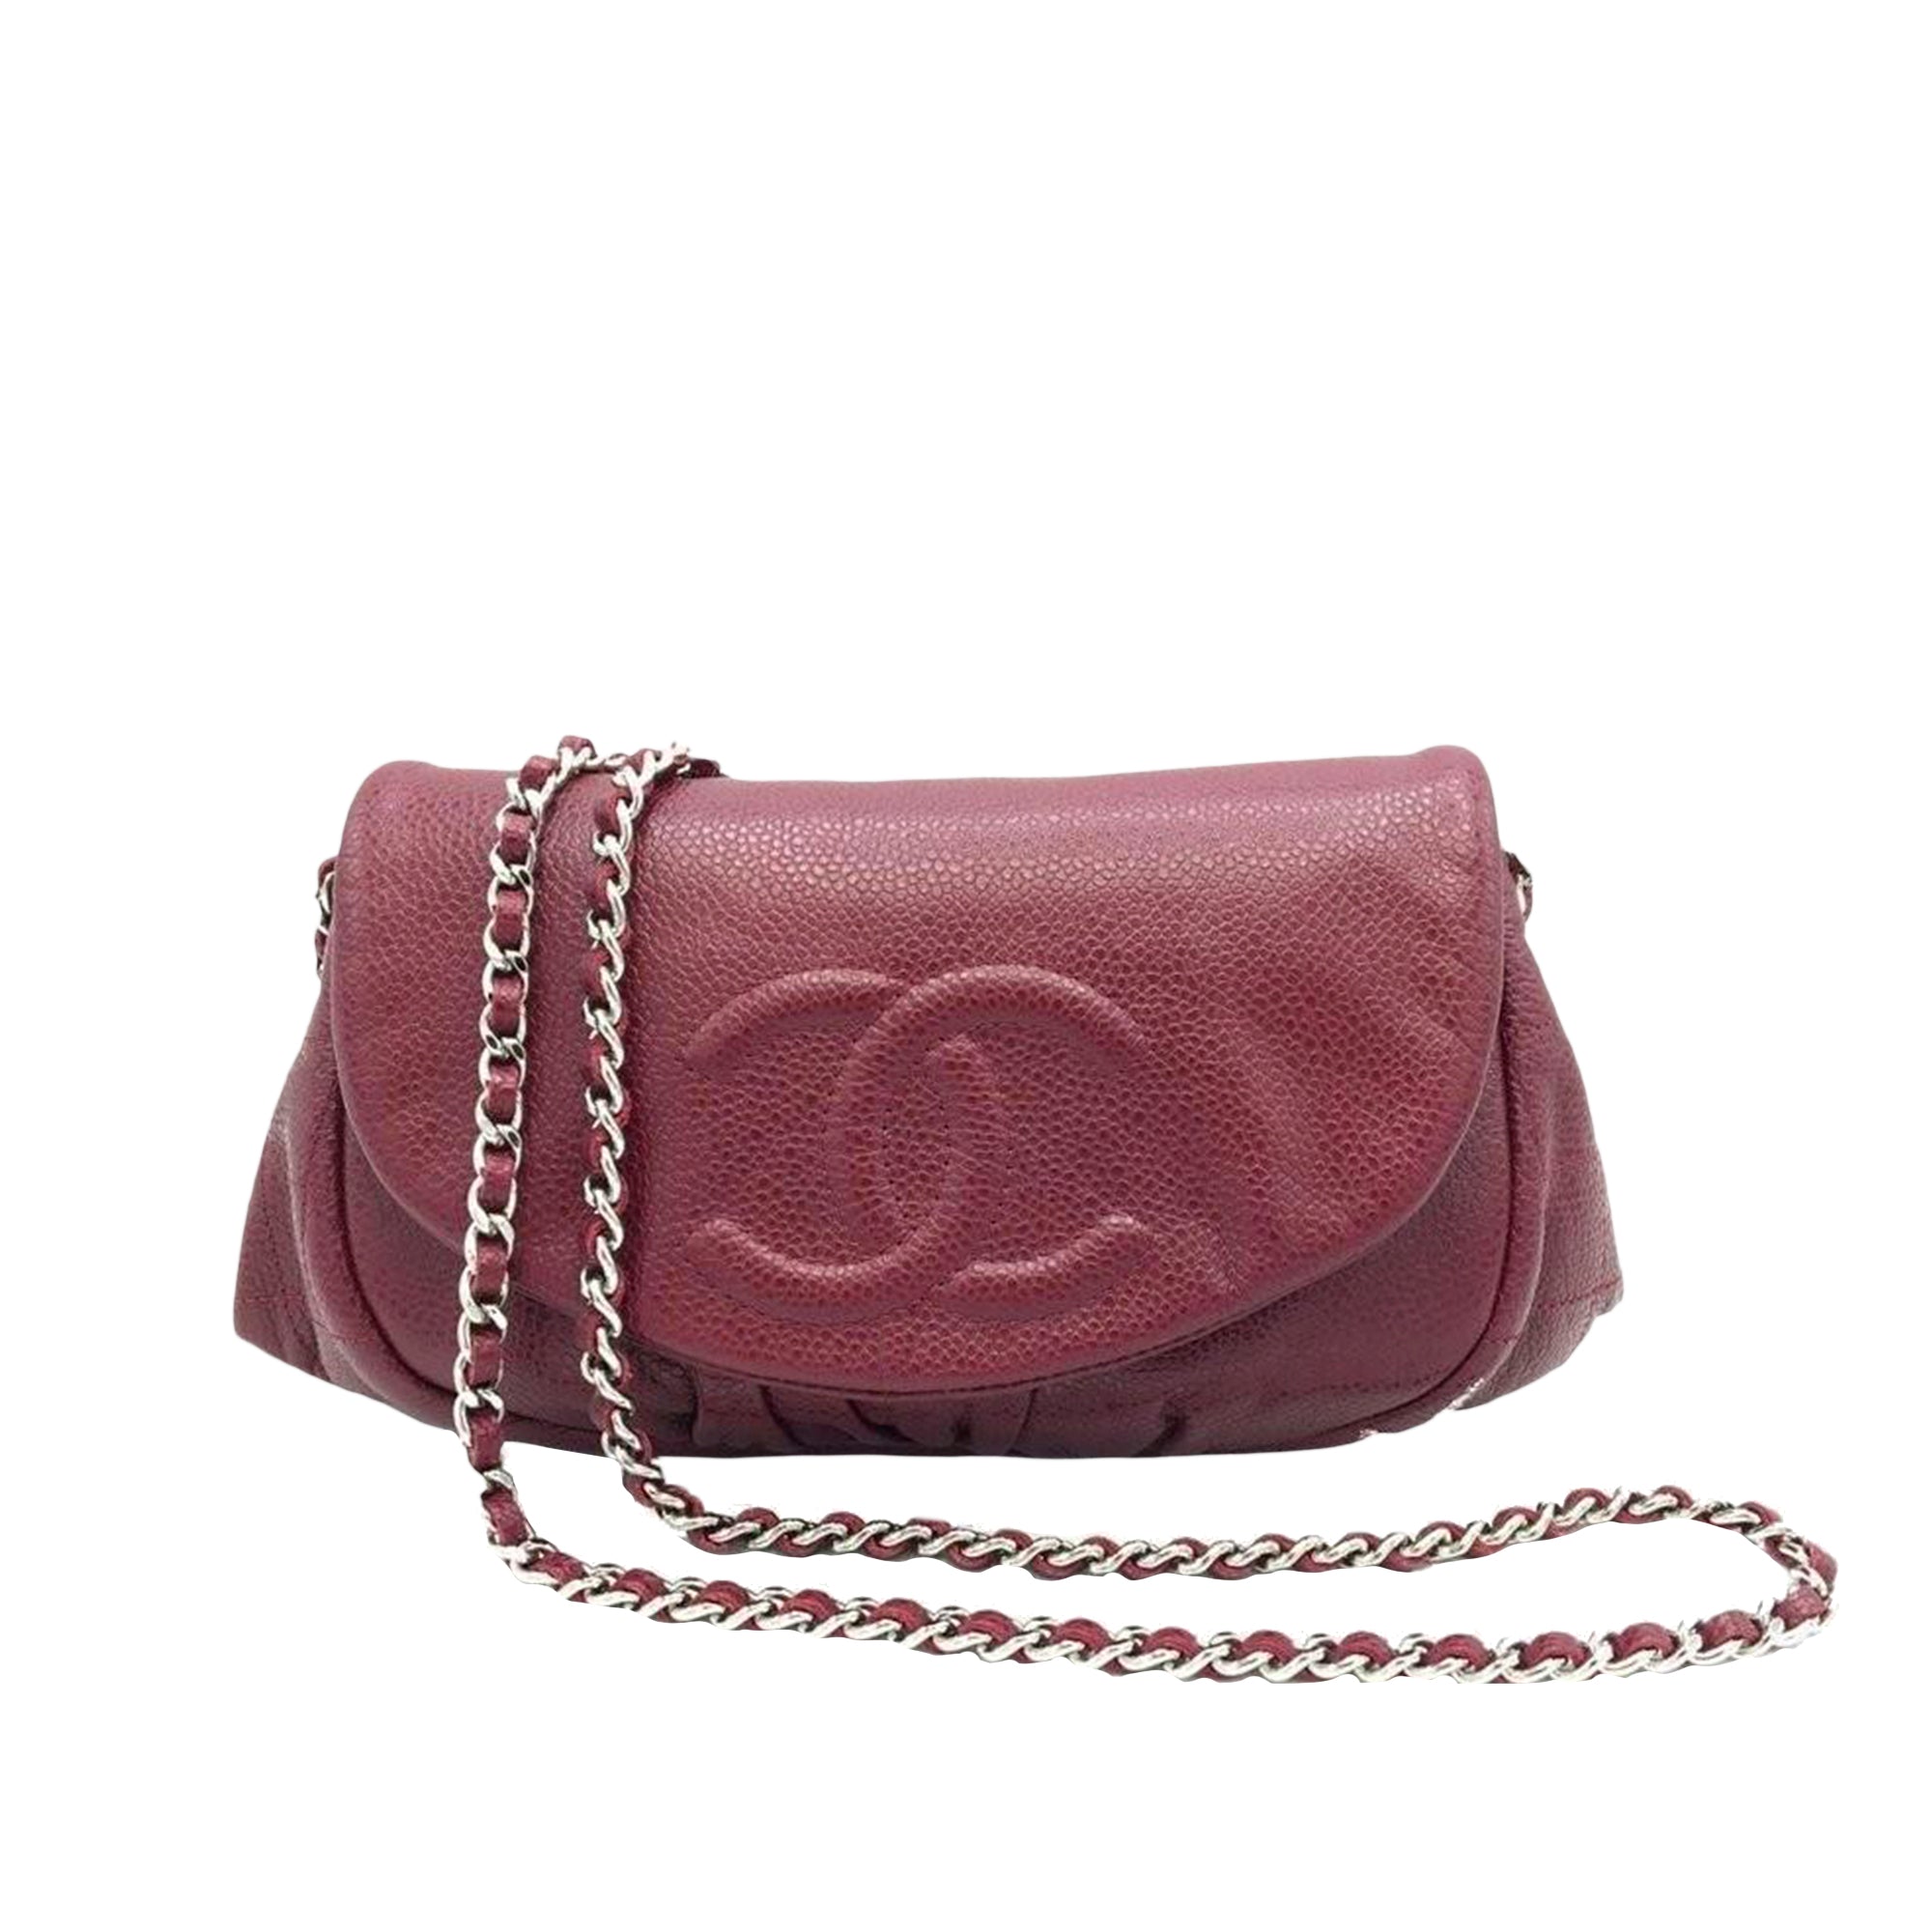 Red Chanel Half Moon Caviar Leather Wallet on Chain Bag | Revival